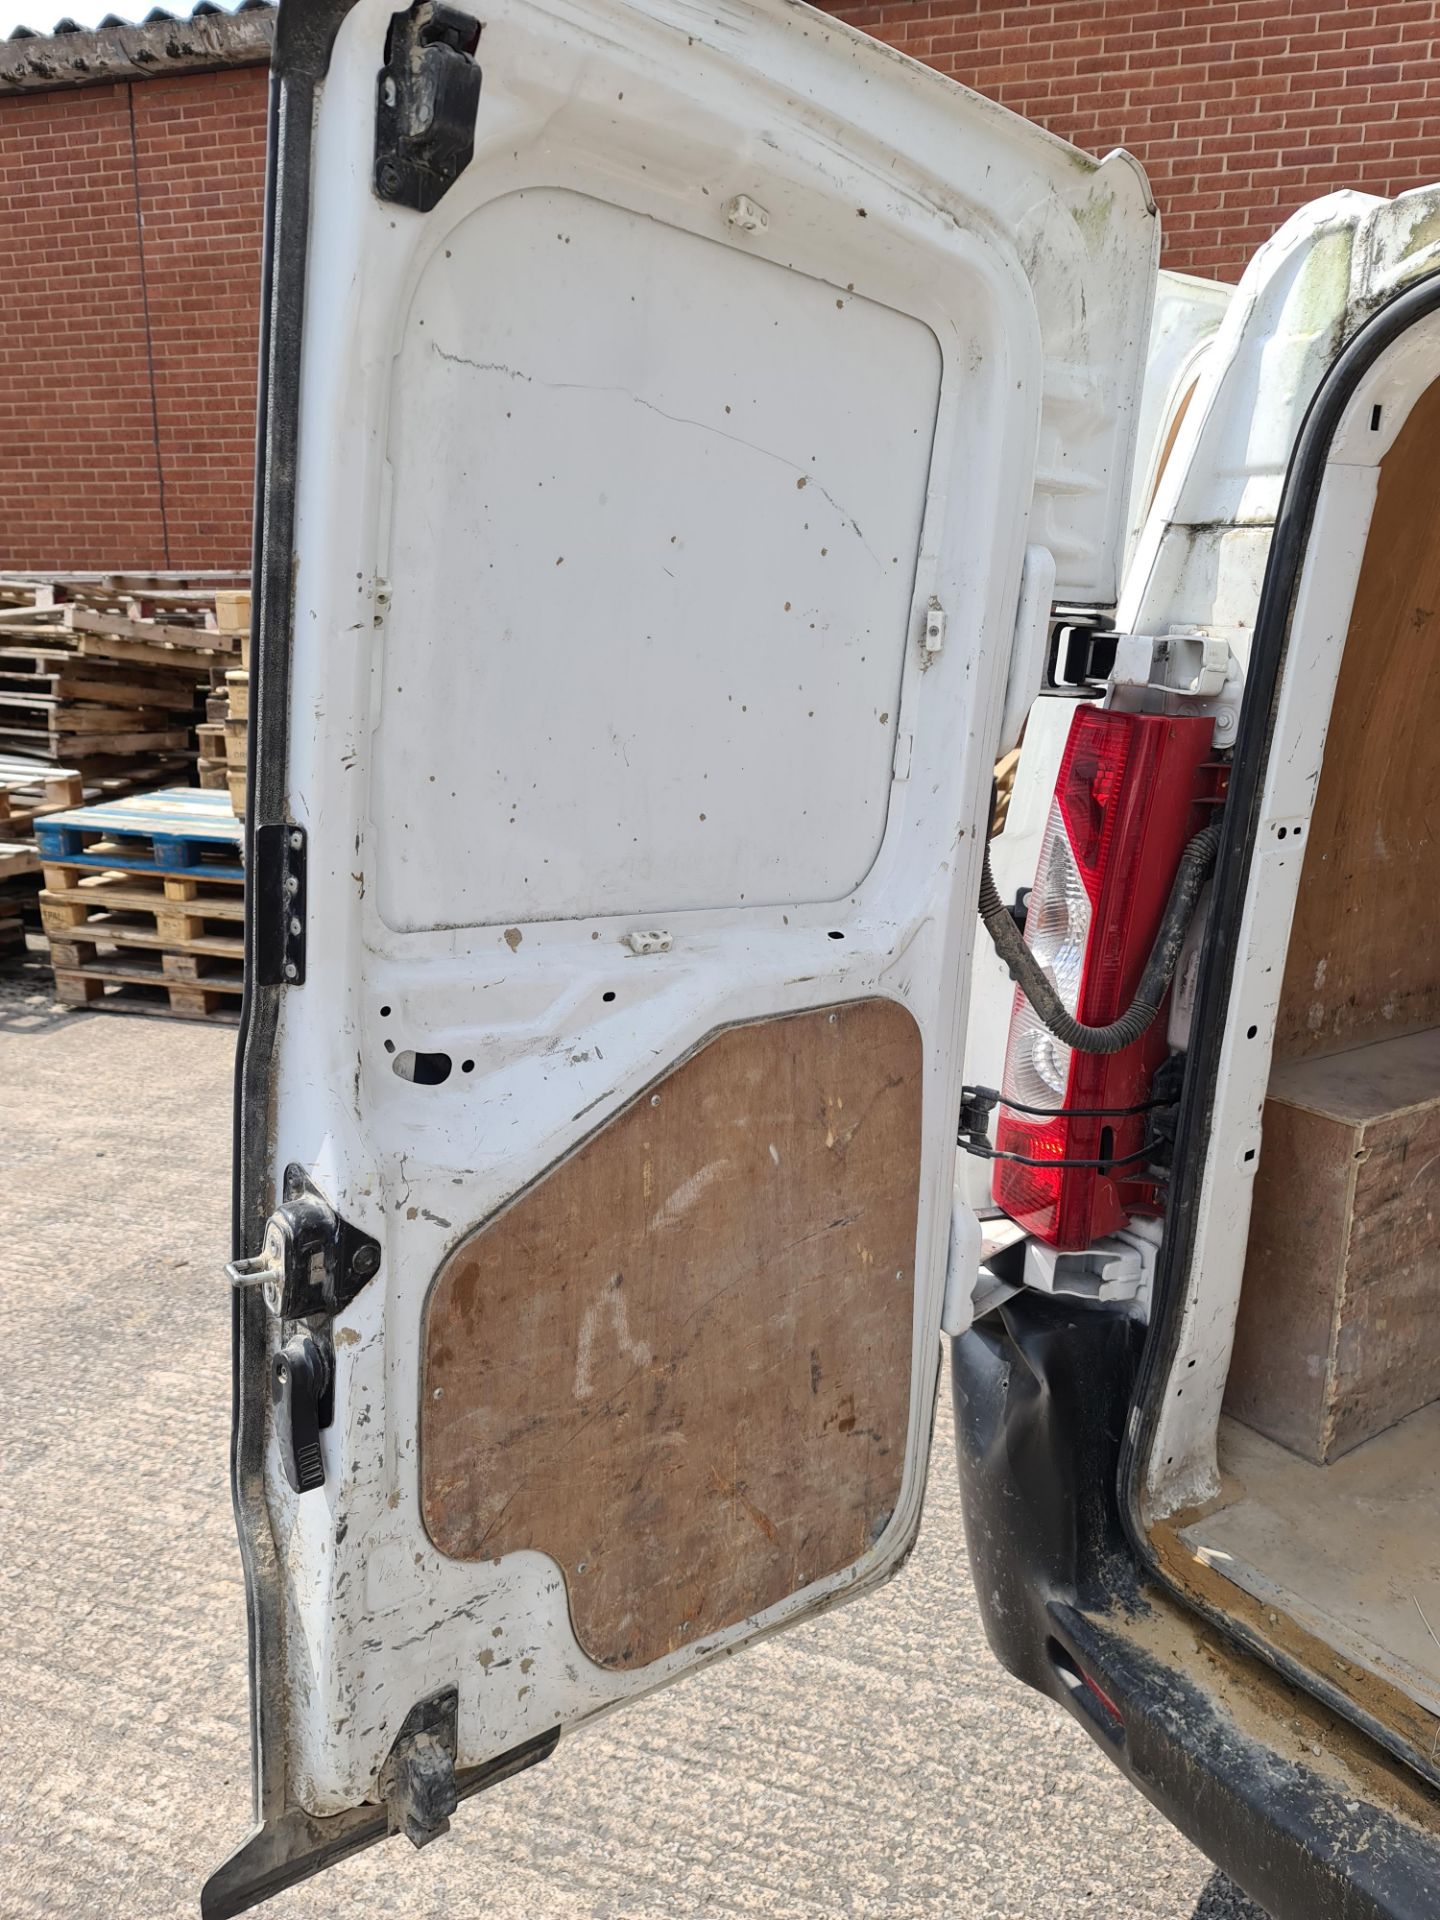 2015 Toyota Proace 1200 L1H1 HDi panel van - Image 41 of 42